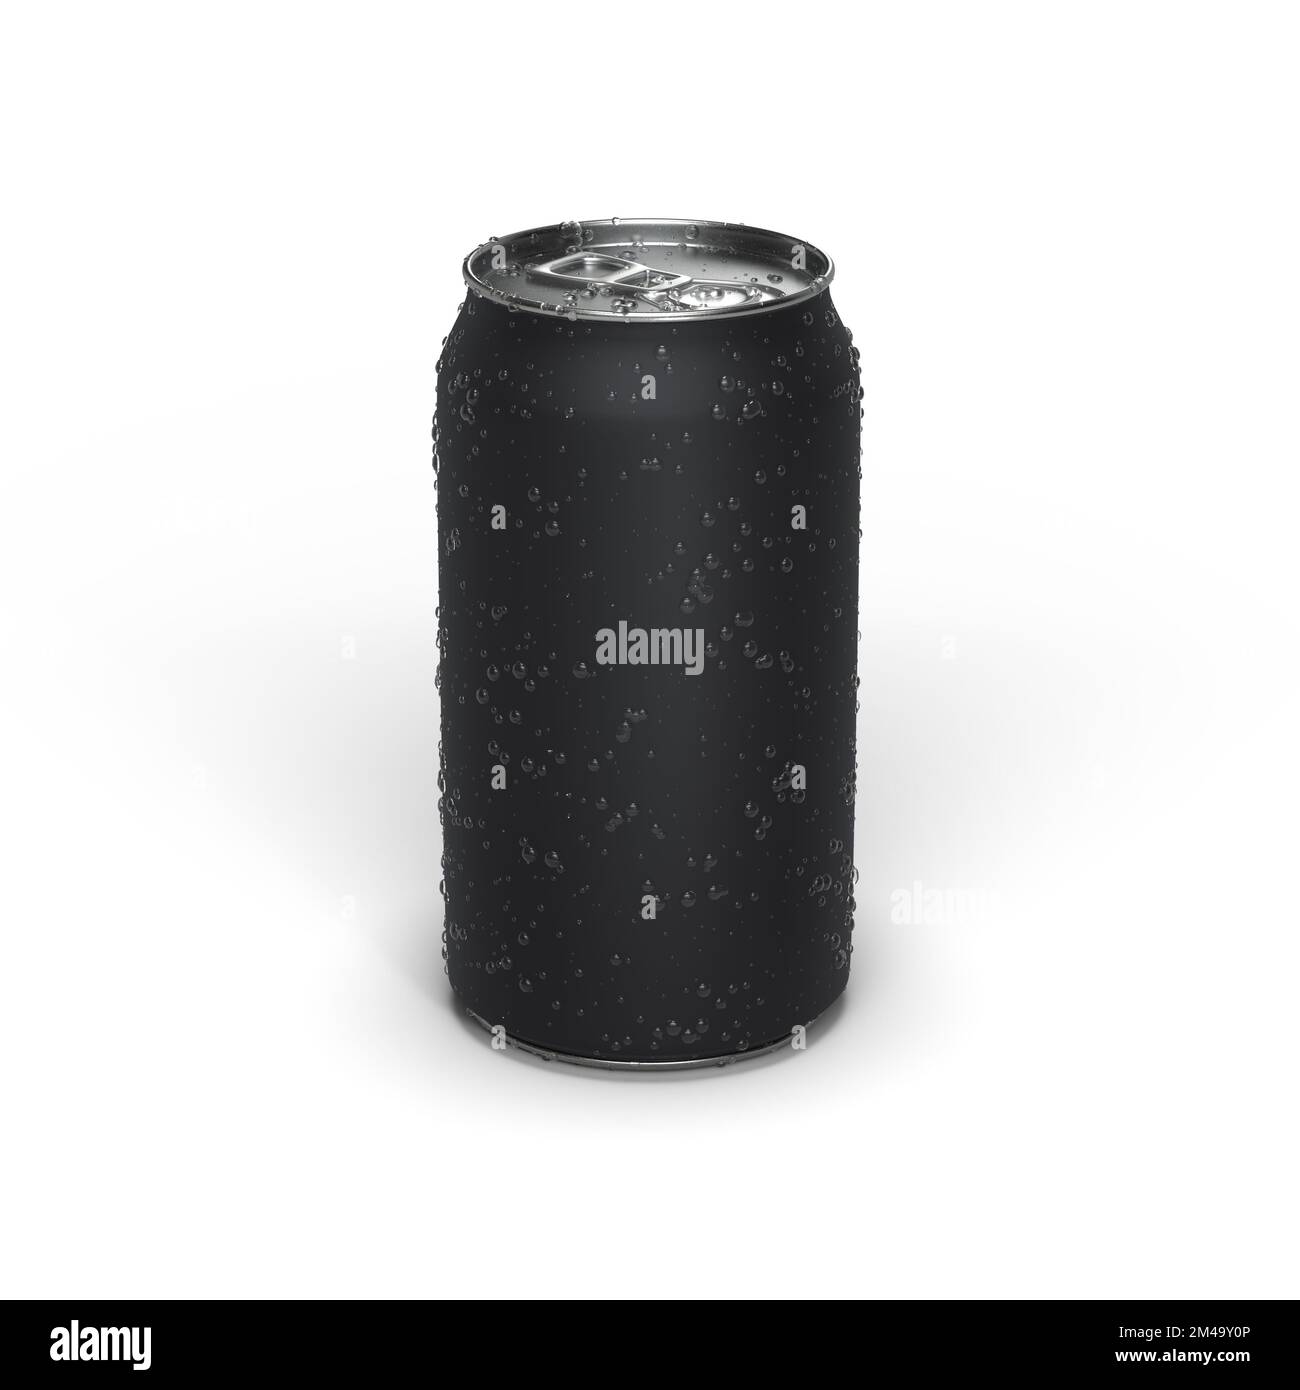 https://c8.alamy.com/comp/2M49Y0P/aluminum-soda-can-matt-black-craft-beer-can-isolated-on-white-3d-render-illustration-2M49Y0P.jpg